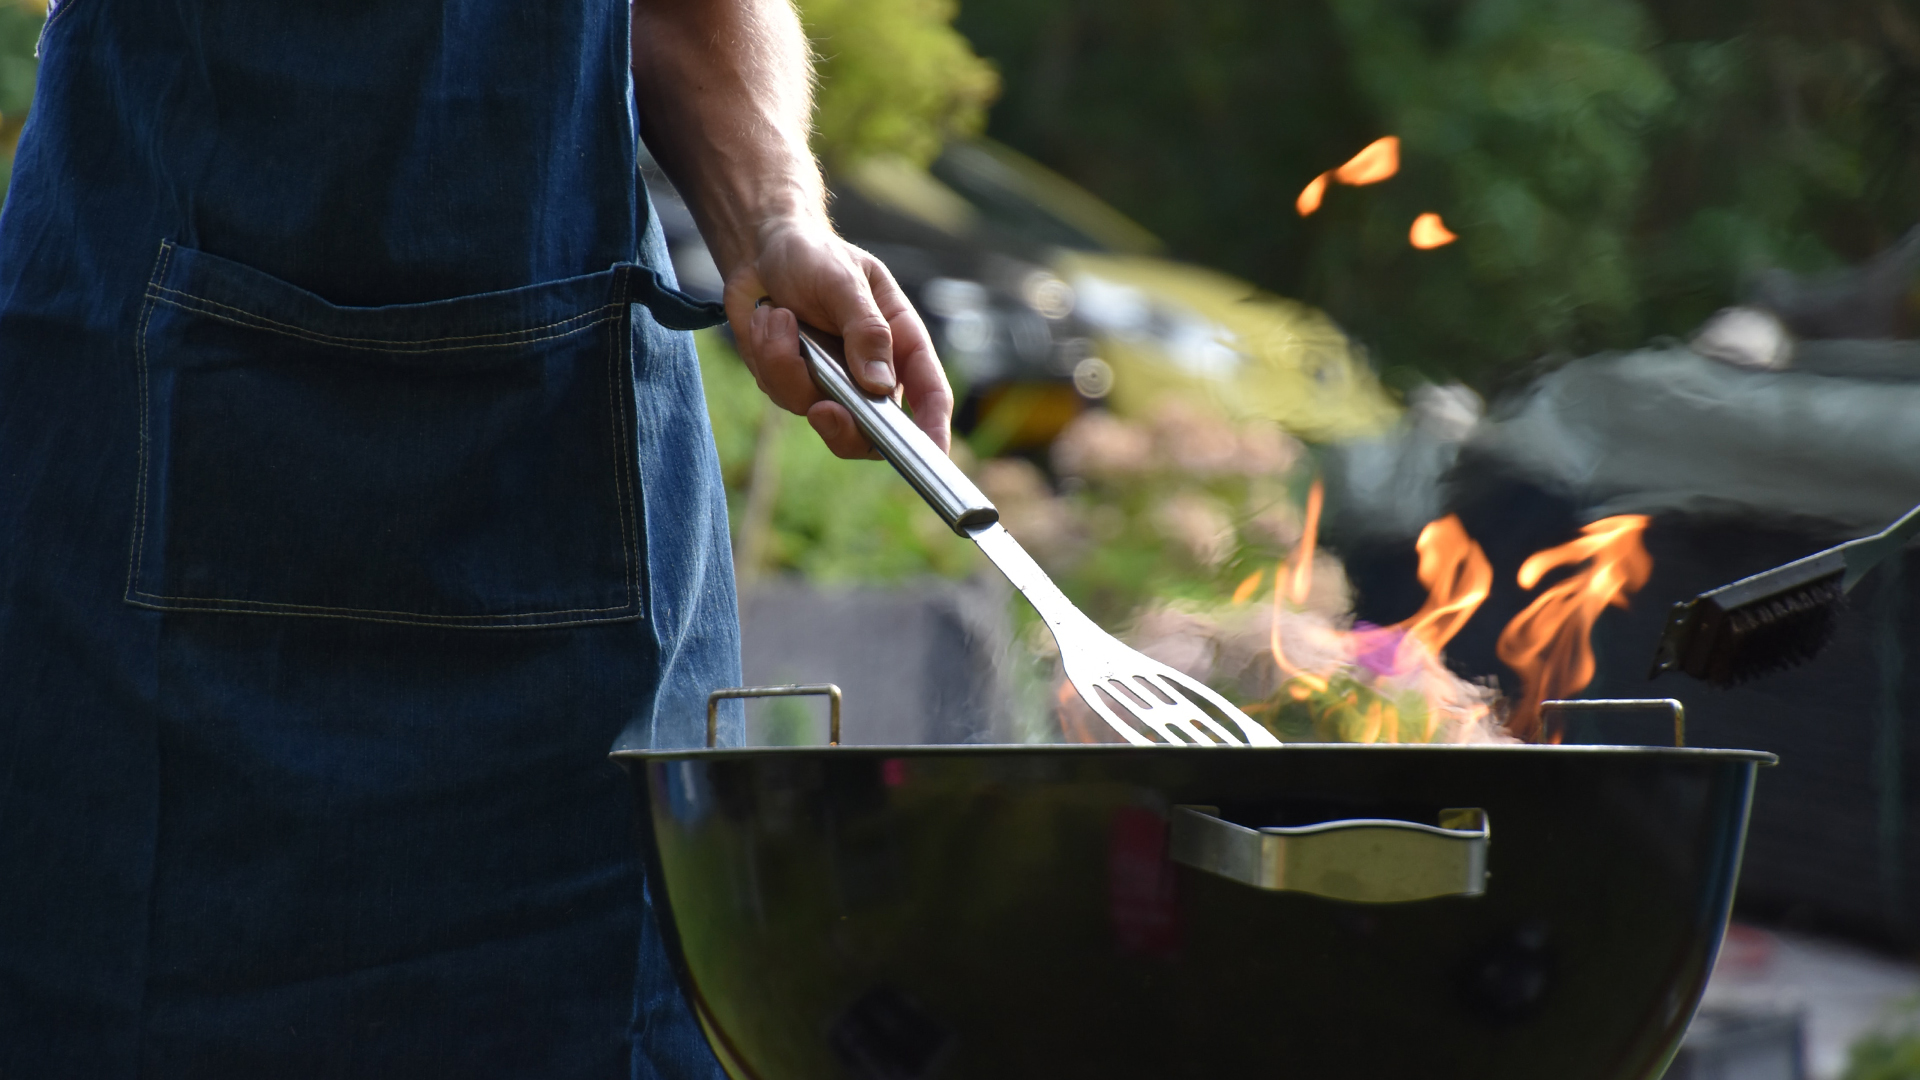 Be safe with your barbecues this summer